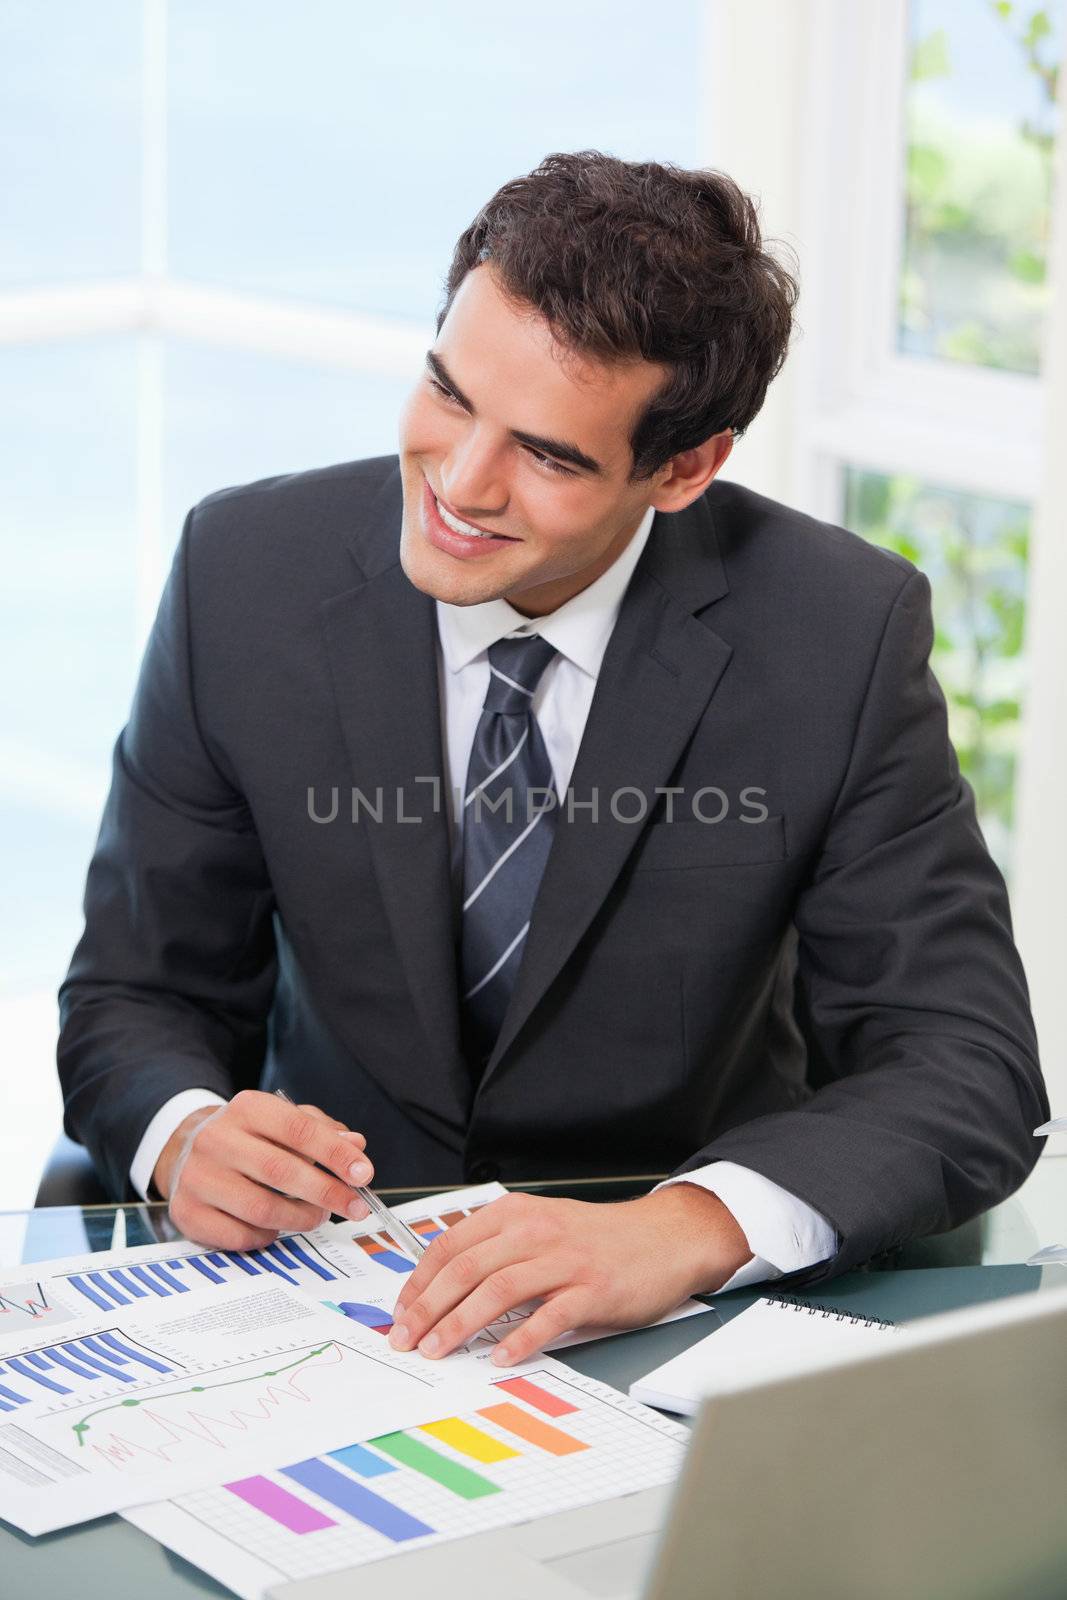 Man pointing out a graph while looking away in an office